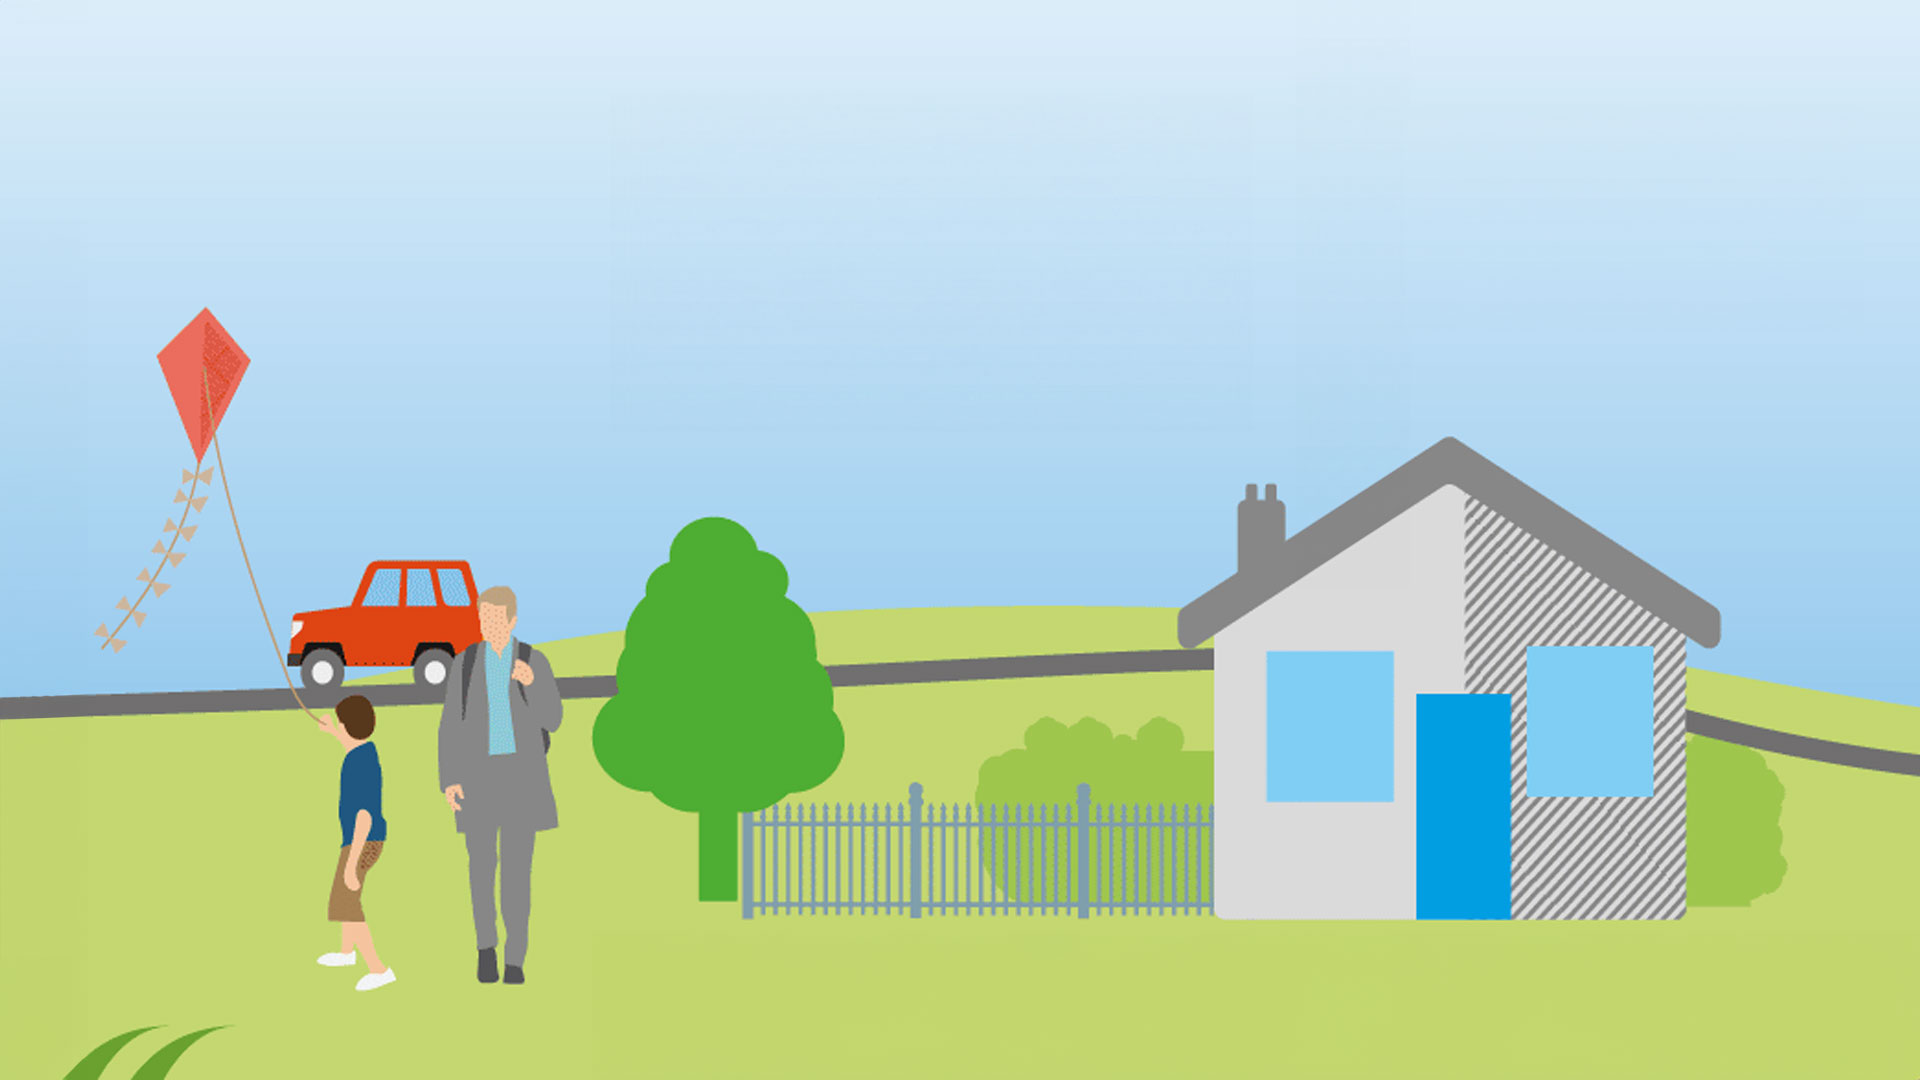 Simple illustration of a boy flying kite outside of a house